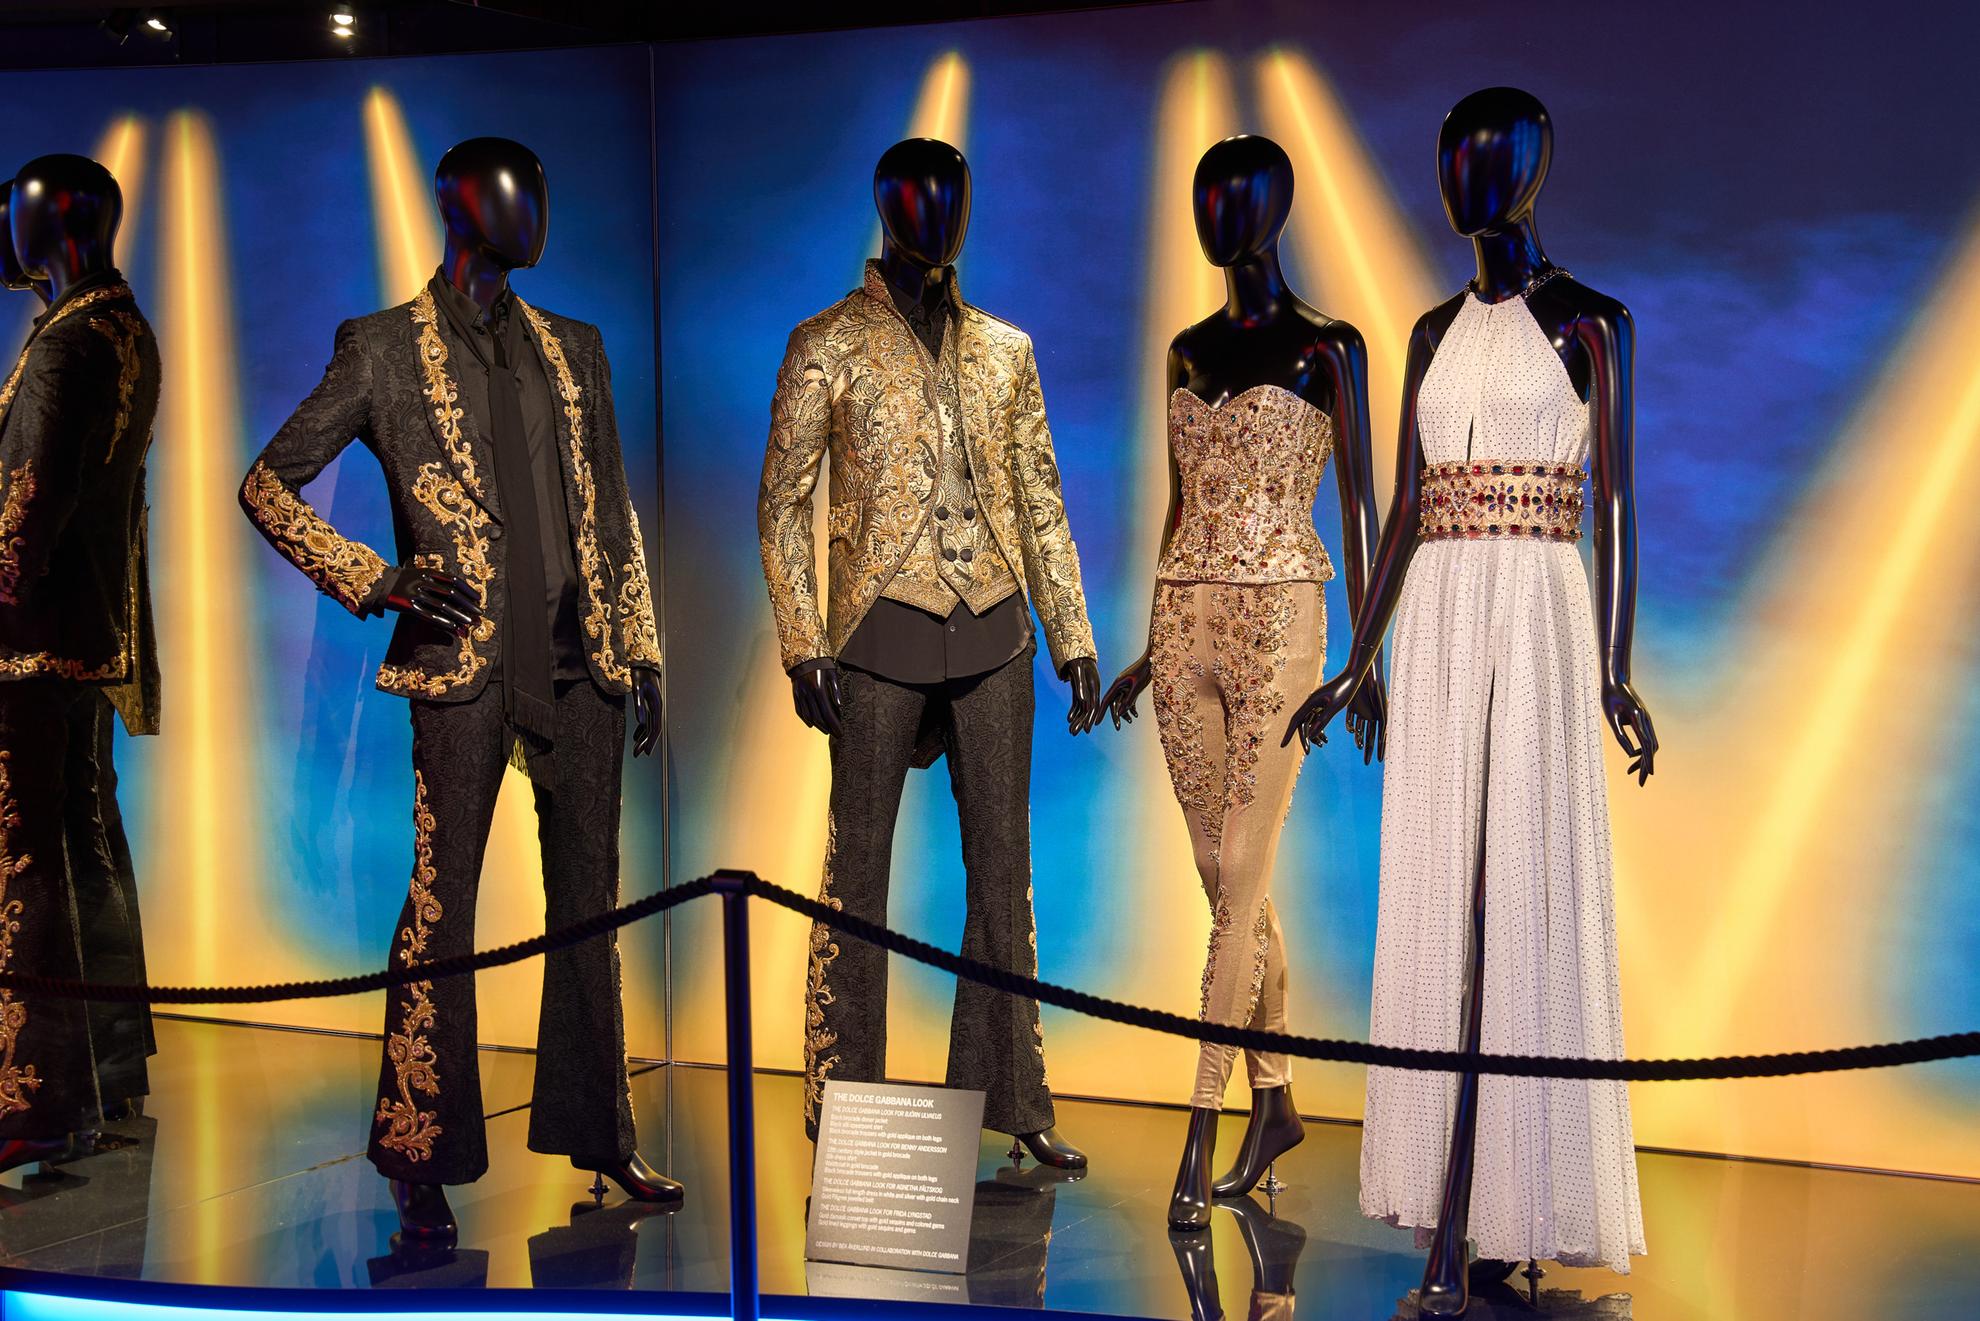 Mannequins with ABBA costumes.